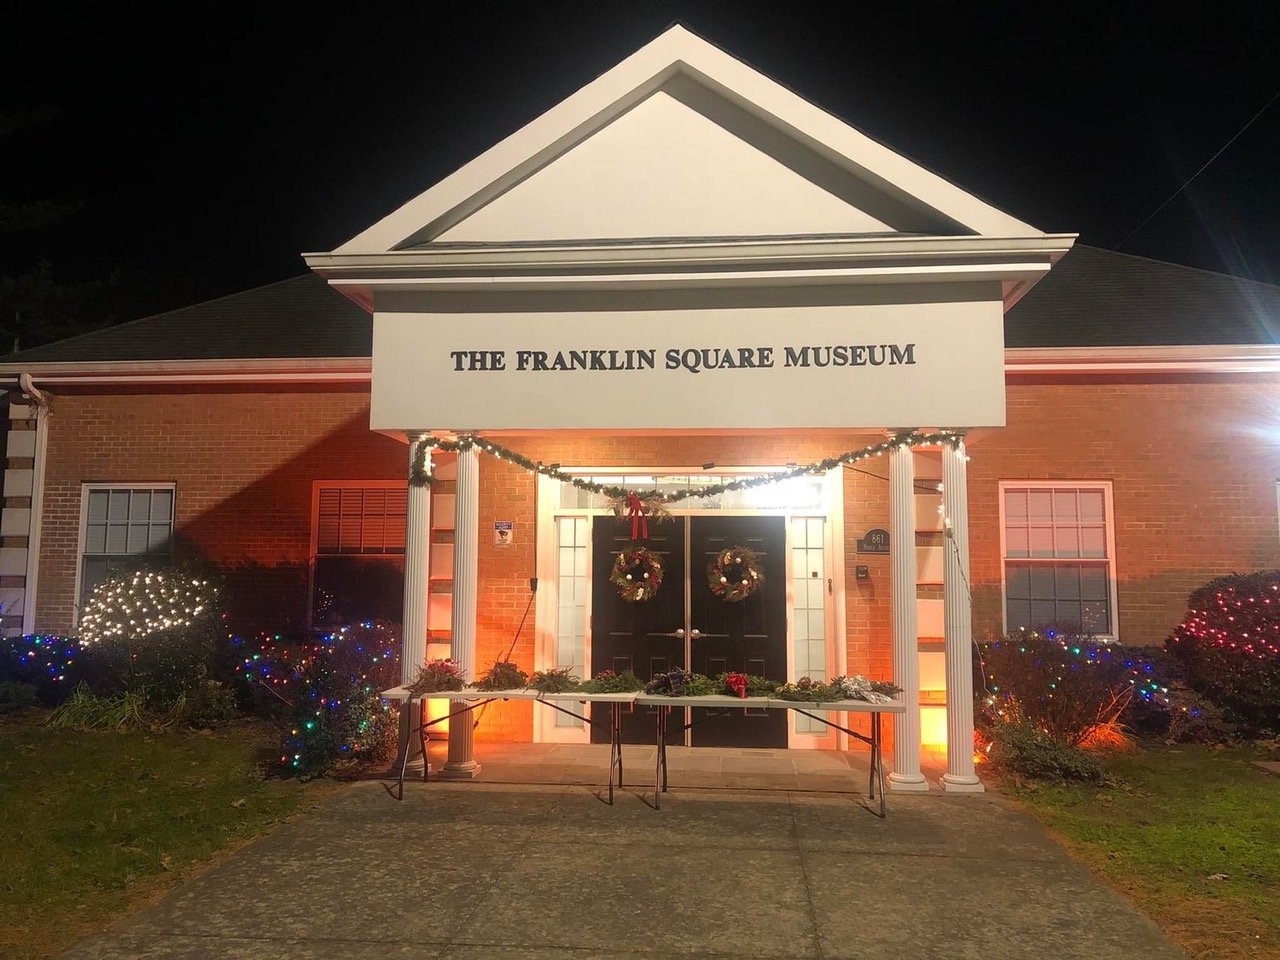 Construction of the Franklin Square Museum began in 1976, and 45 years later, it officially opened.